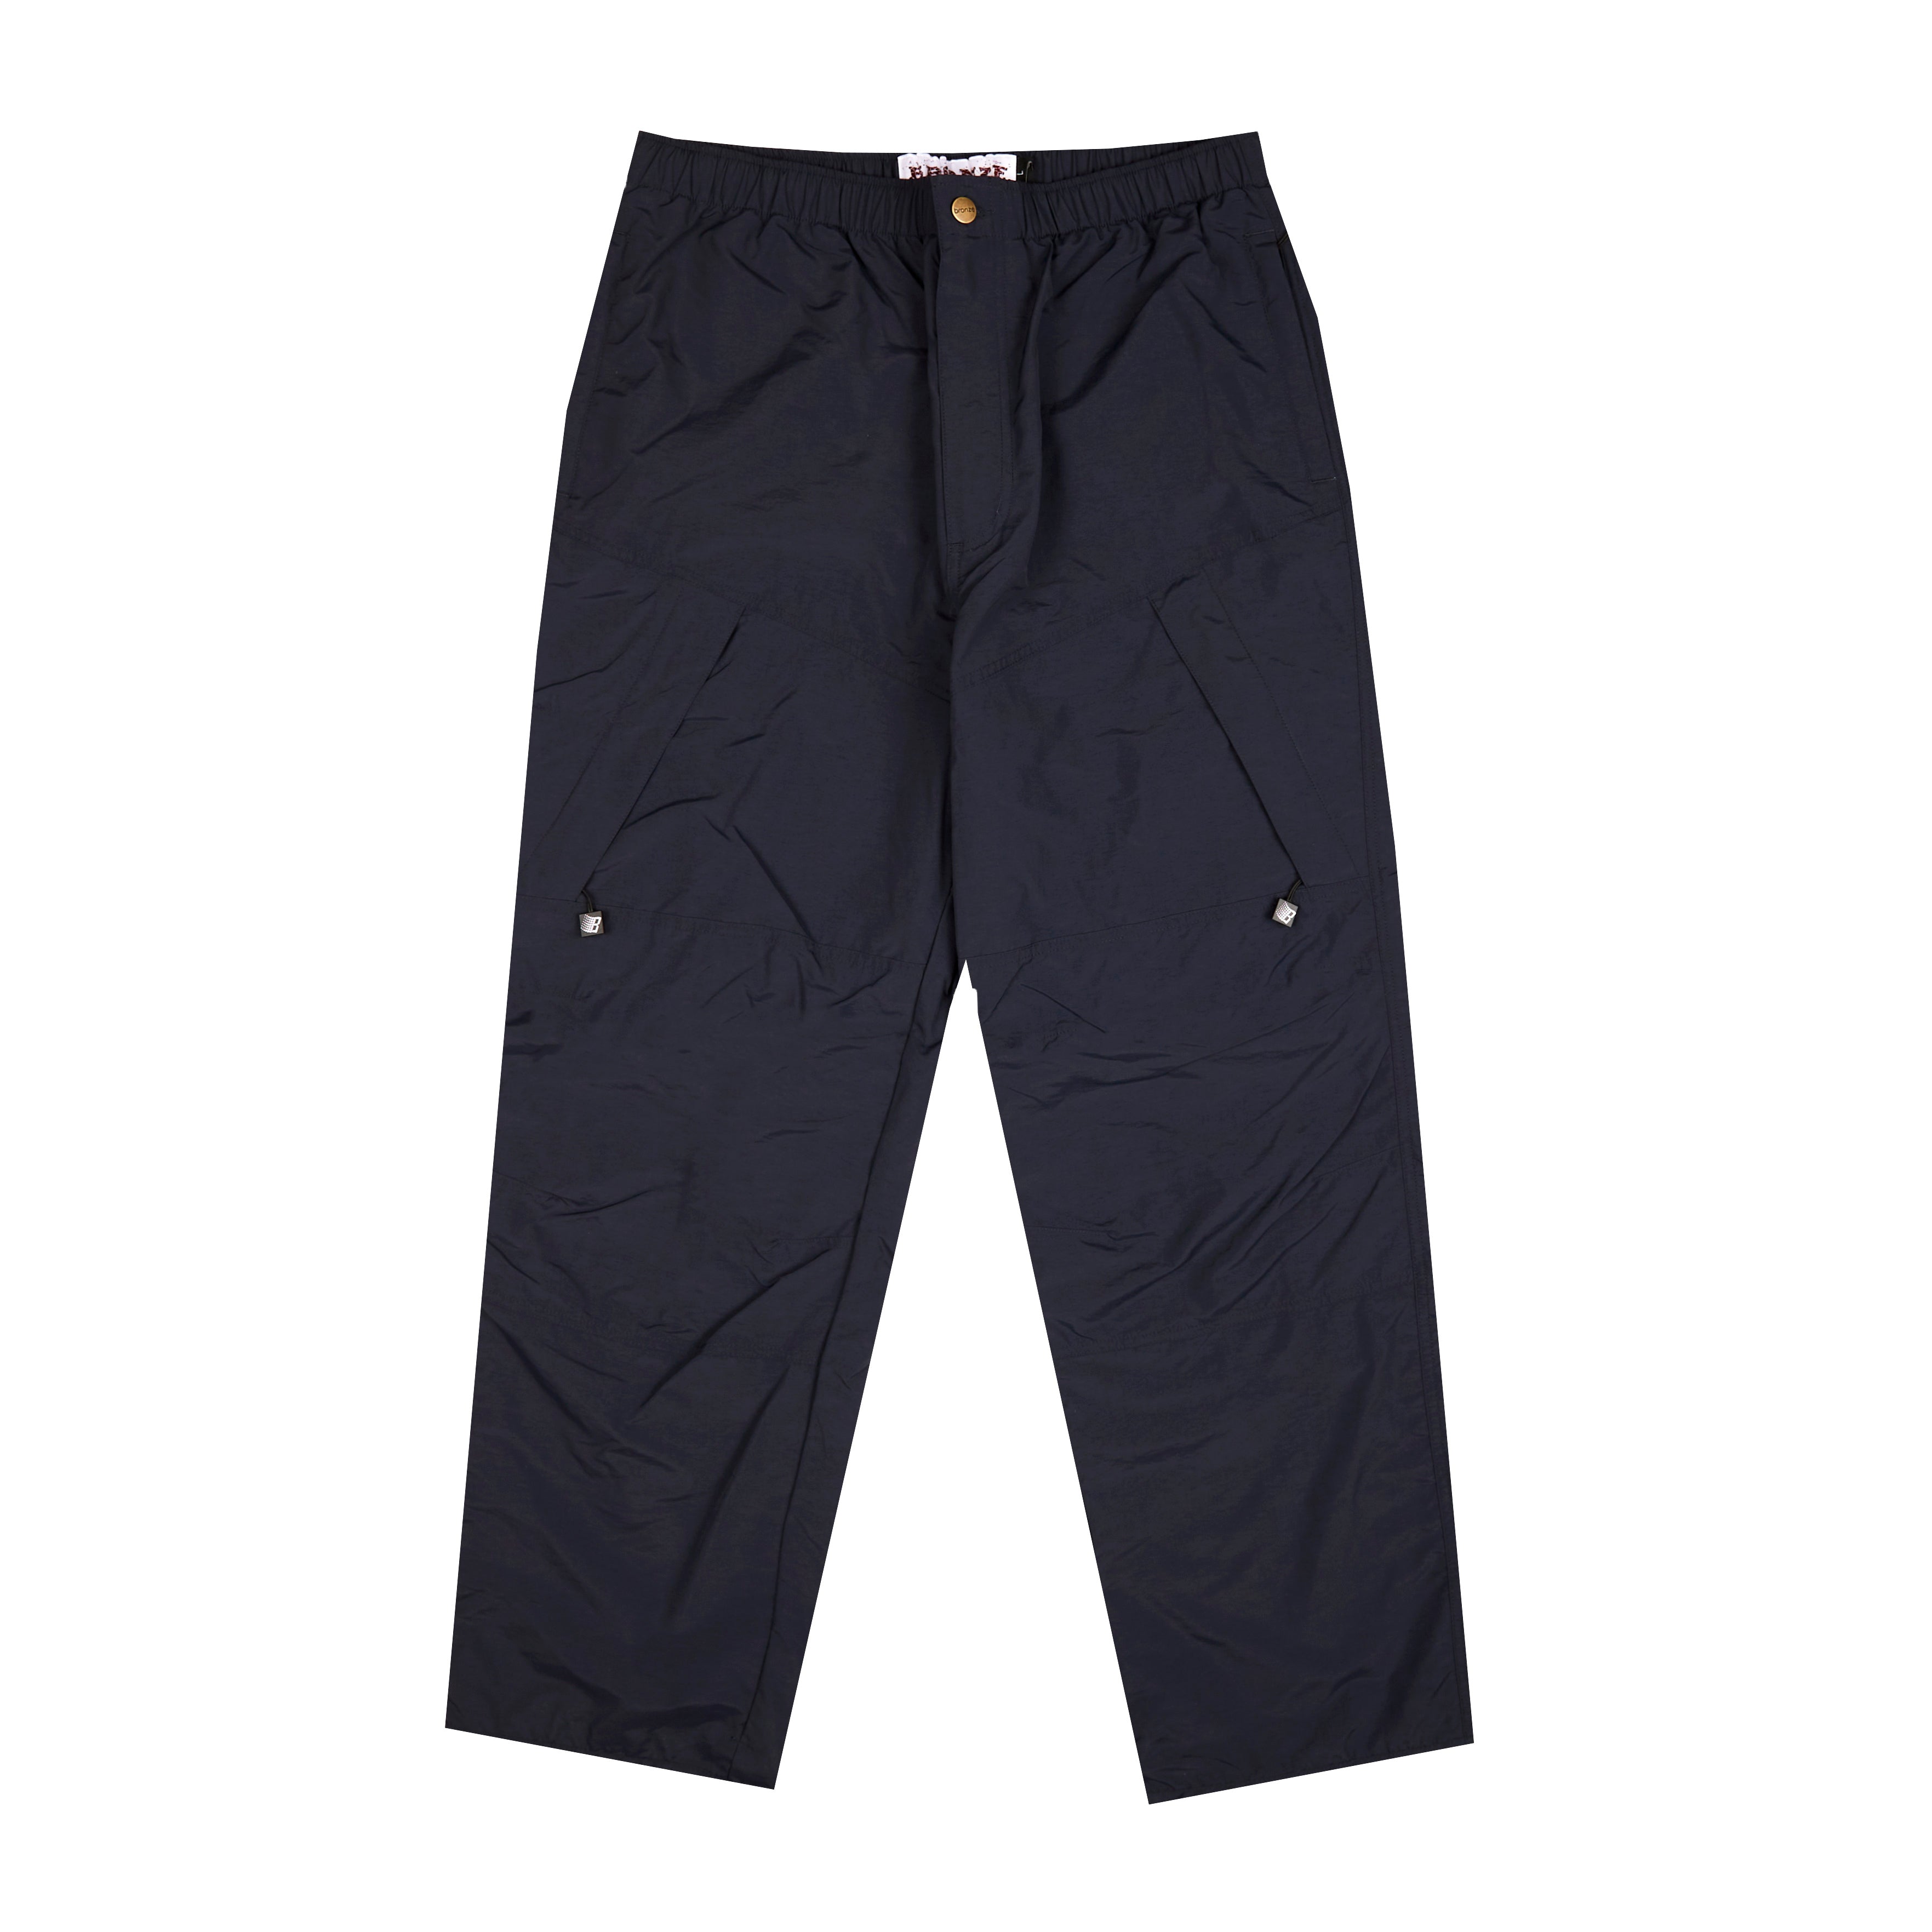 Delta Performance Pant, Solid - Anchor Navy